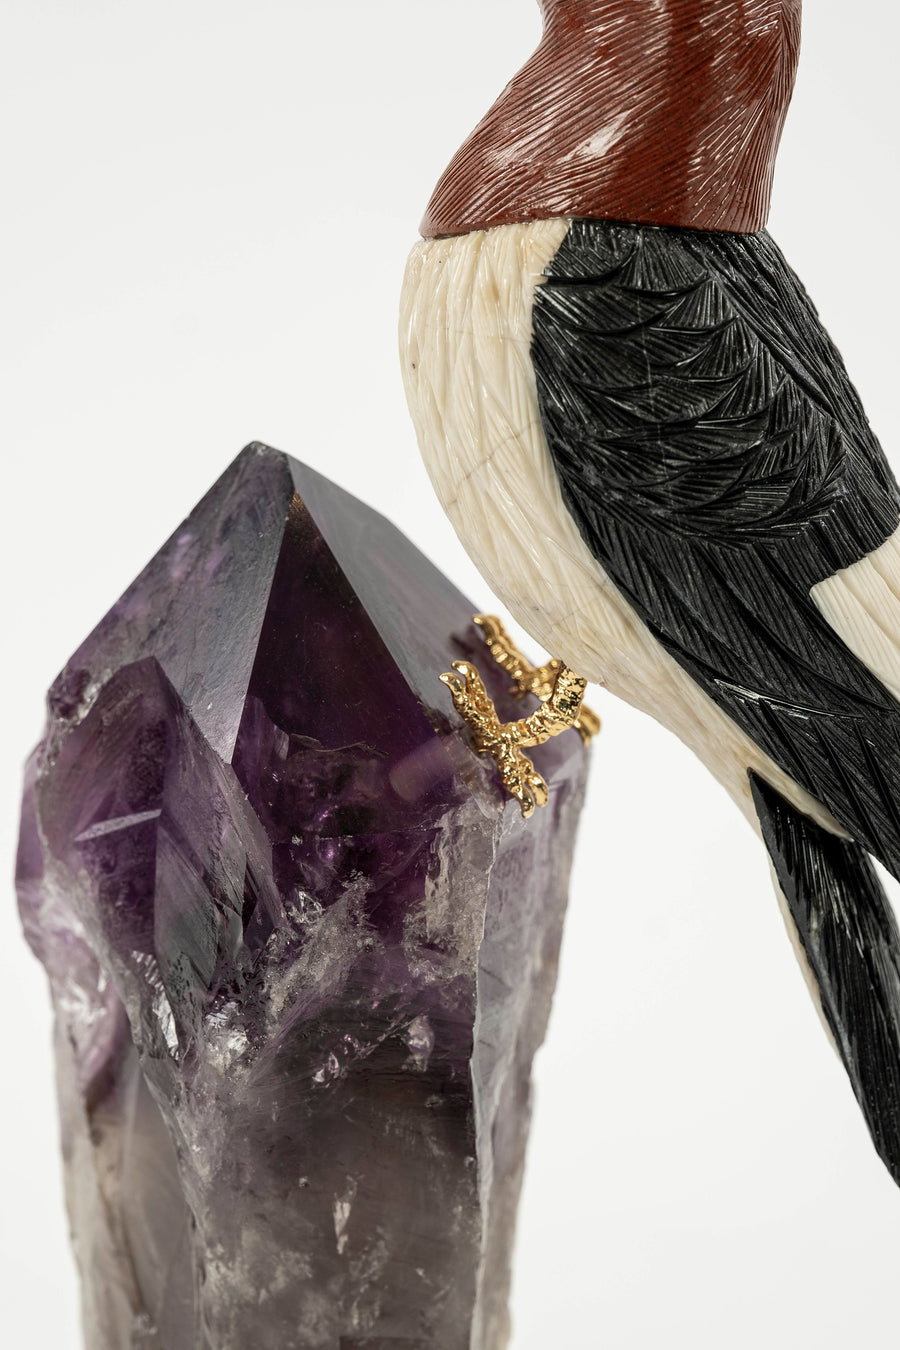 Carved Agate Woodpecker on Amethyst Base